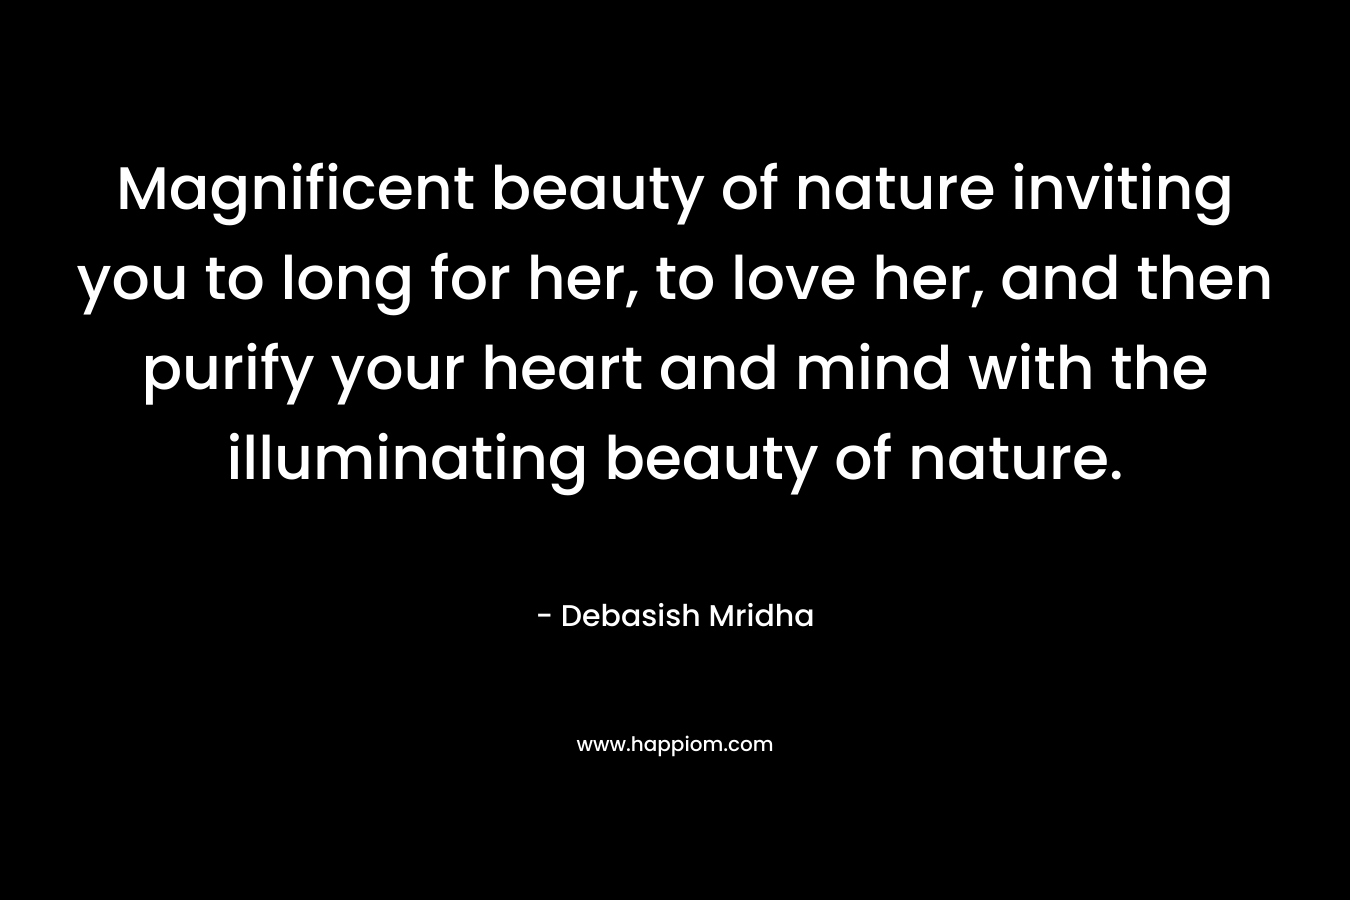 Magnificent beauty of nature inviting you to long for her, to love her, and then purify your heart and mind with the illuminating beauty of nature. – Debasish Mridha